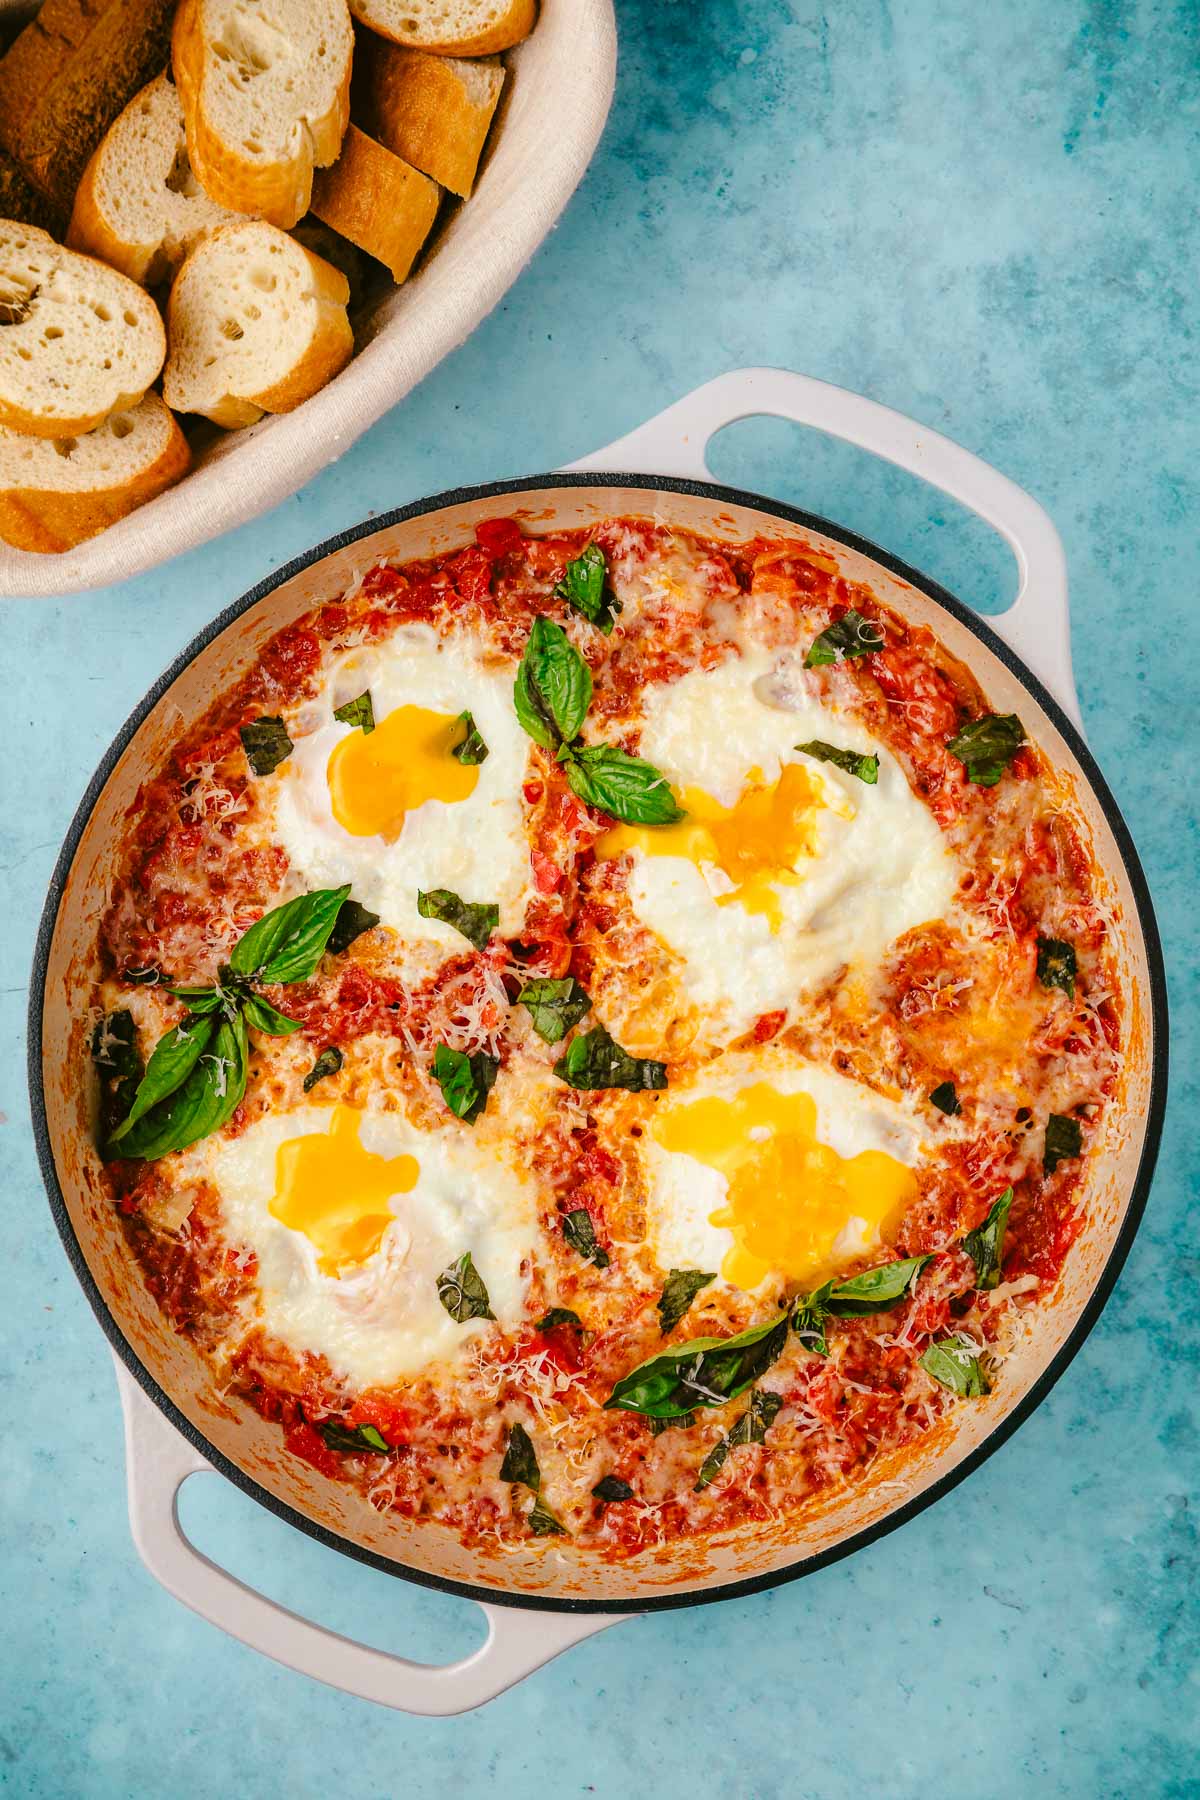 eggs in purgatory in a skillet next to a basket of sliced crusty bread.